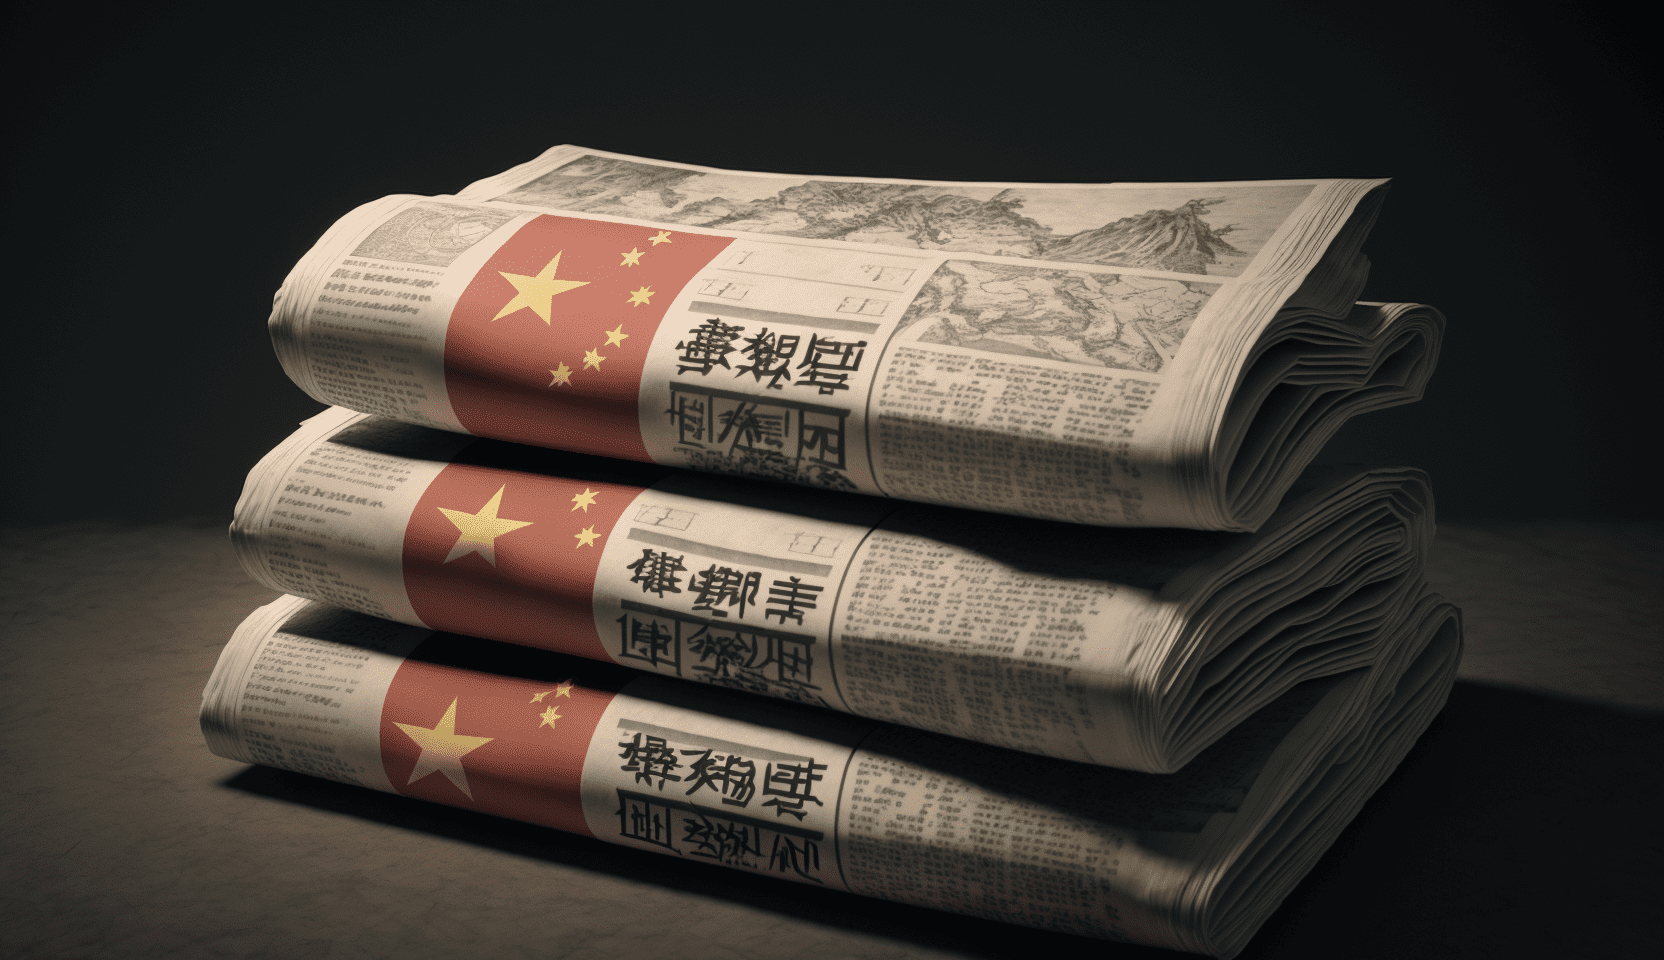 brewbart_three_newspapers_stacked_on_top_of_each_other_from_chi_dd4e78a3-d6bd-410f-b971-0da555bcf070